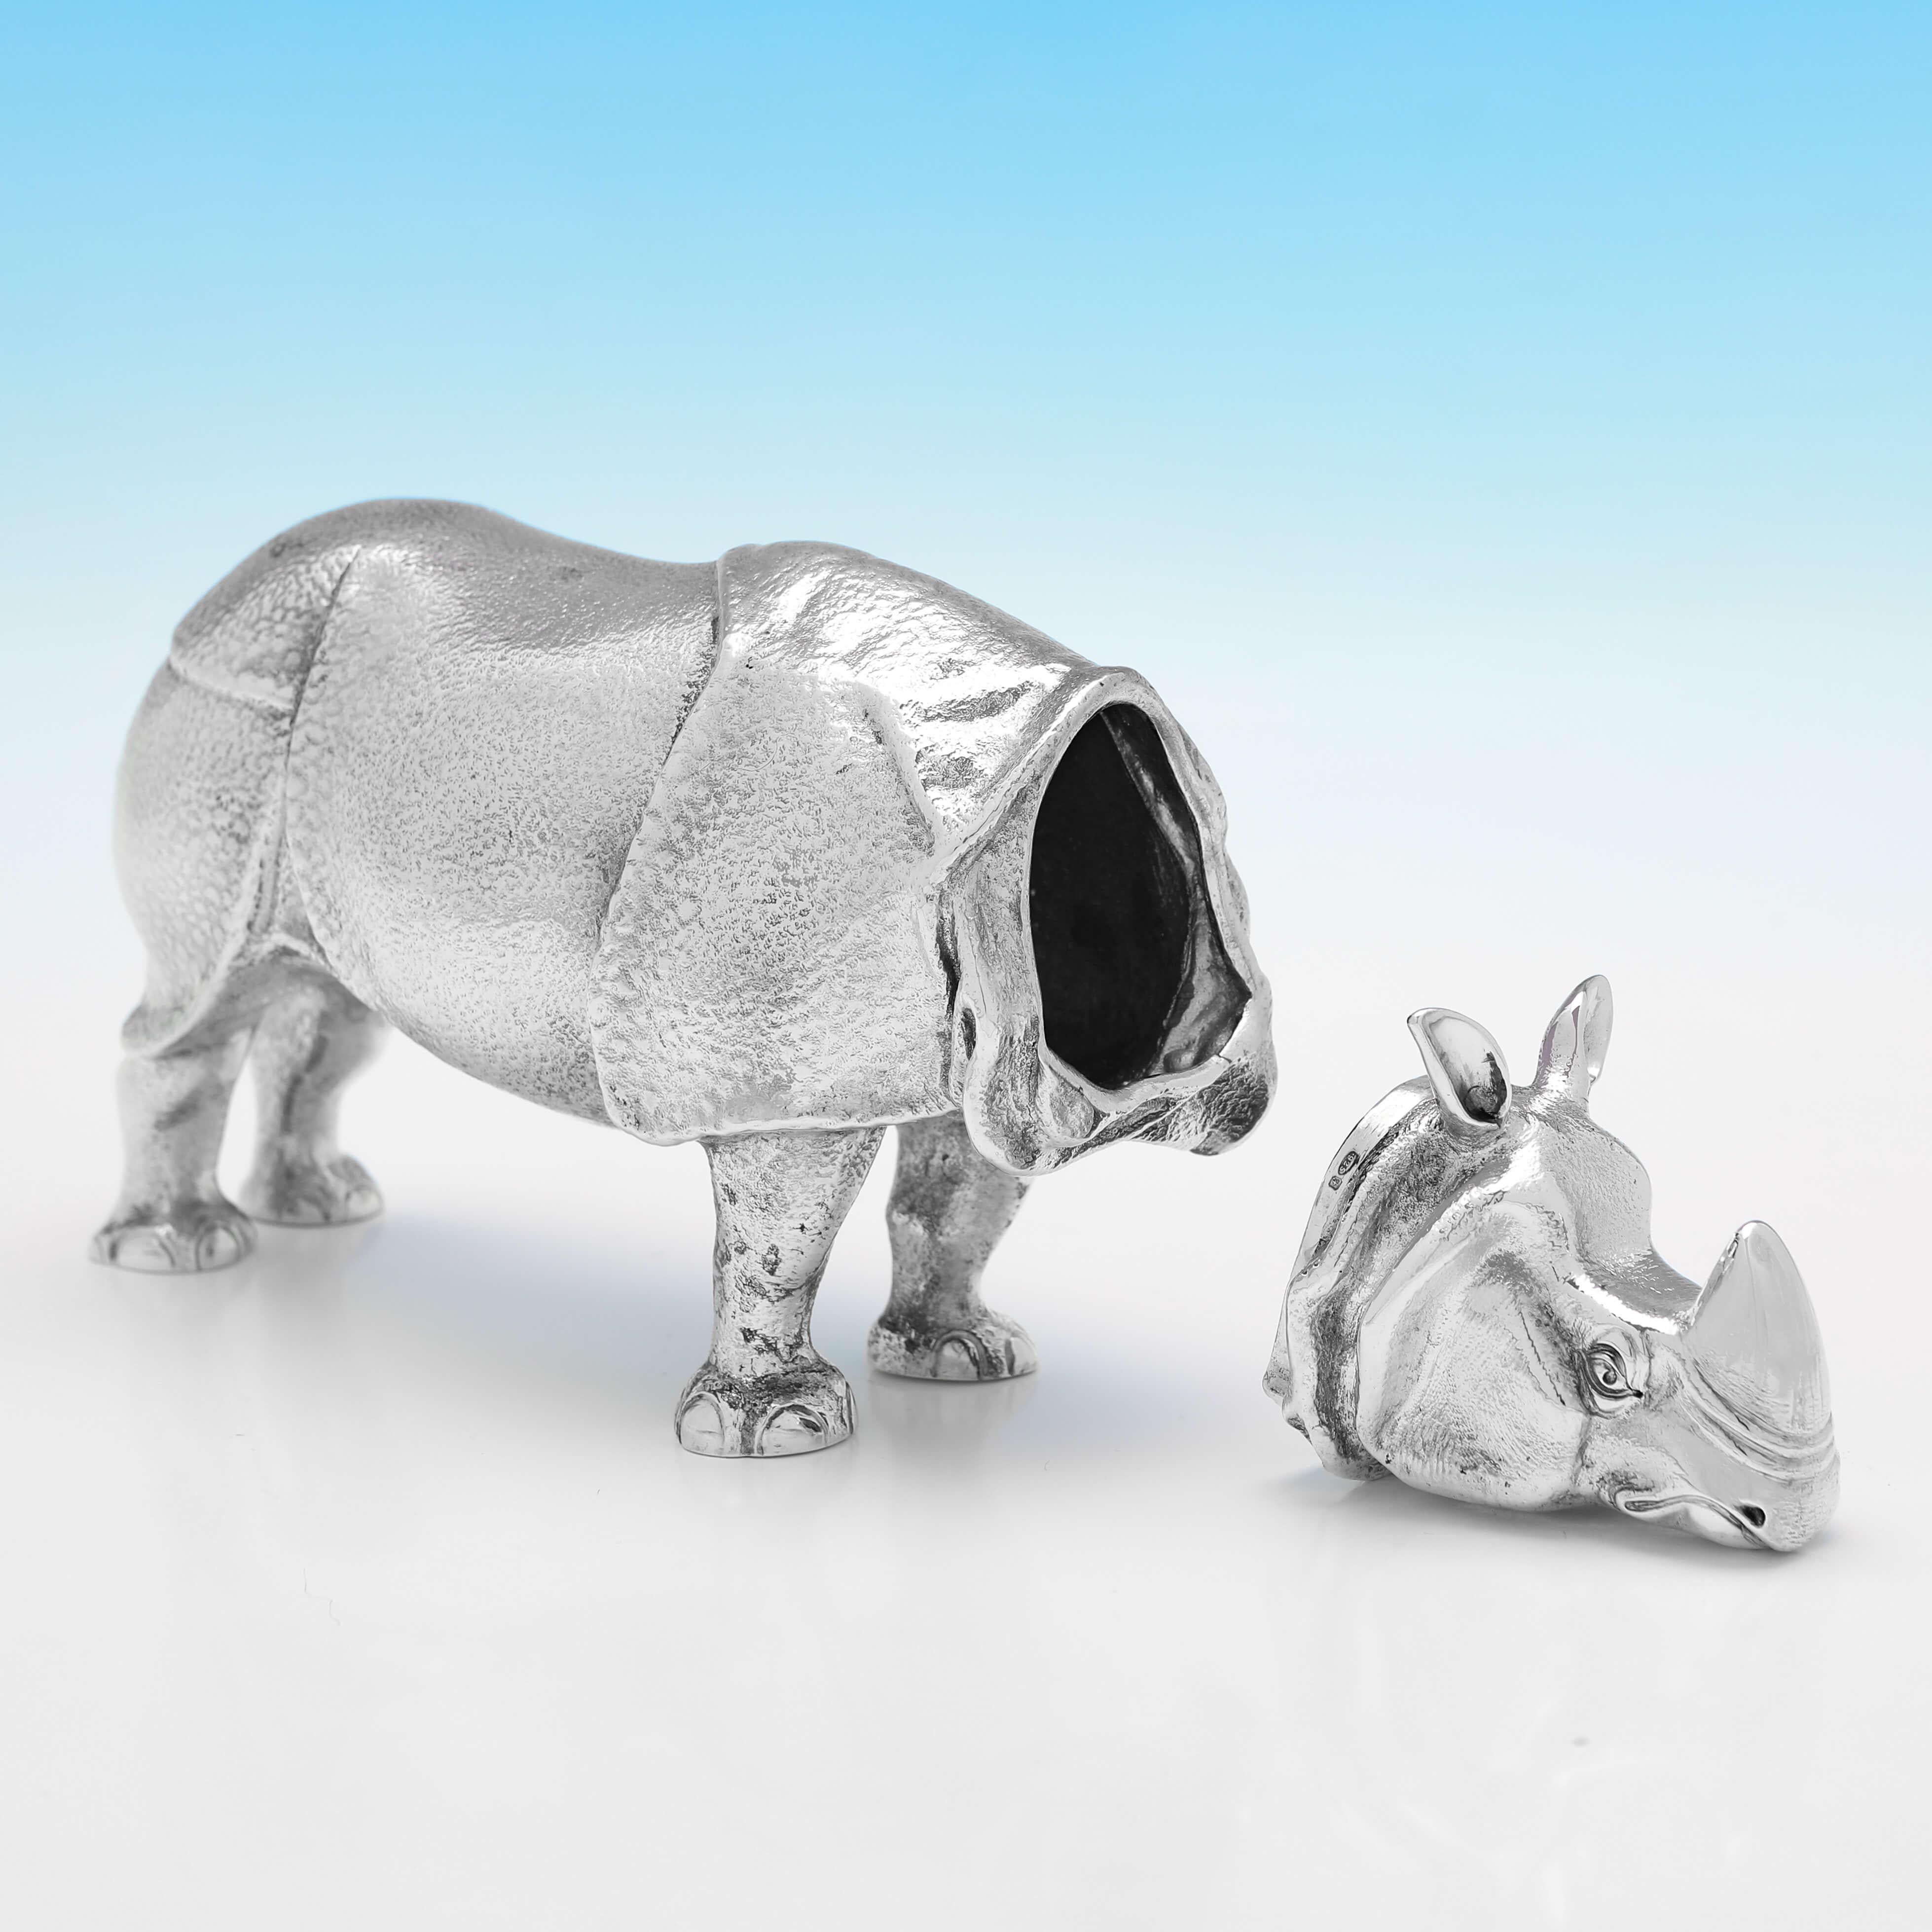 English Very Rare Antique Sterling Silver Rhinoceros Model - Hallmarked in 1906 For Sale